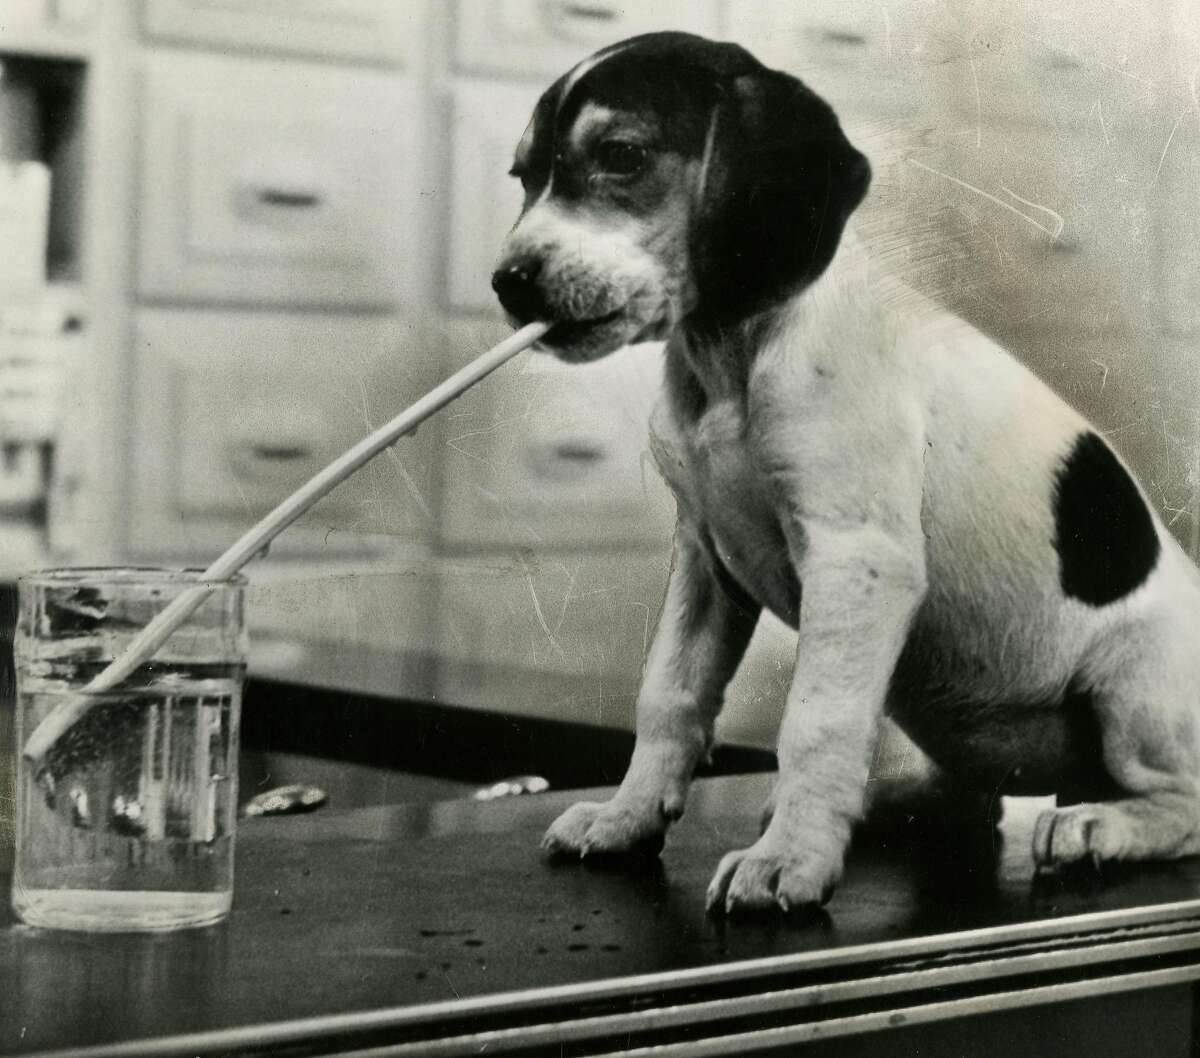 Beagle puppy, "Pat Too," or Pat the second, learns to sip through a straw at his master's pharmacy soda fountain. January 5, 1967. Photo courtesy of AP.